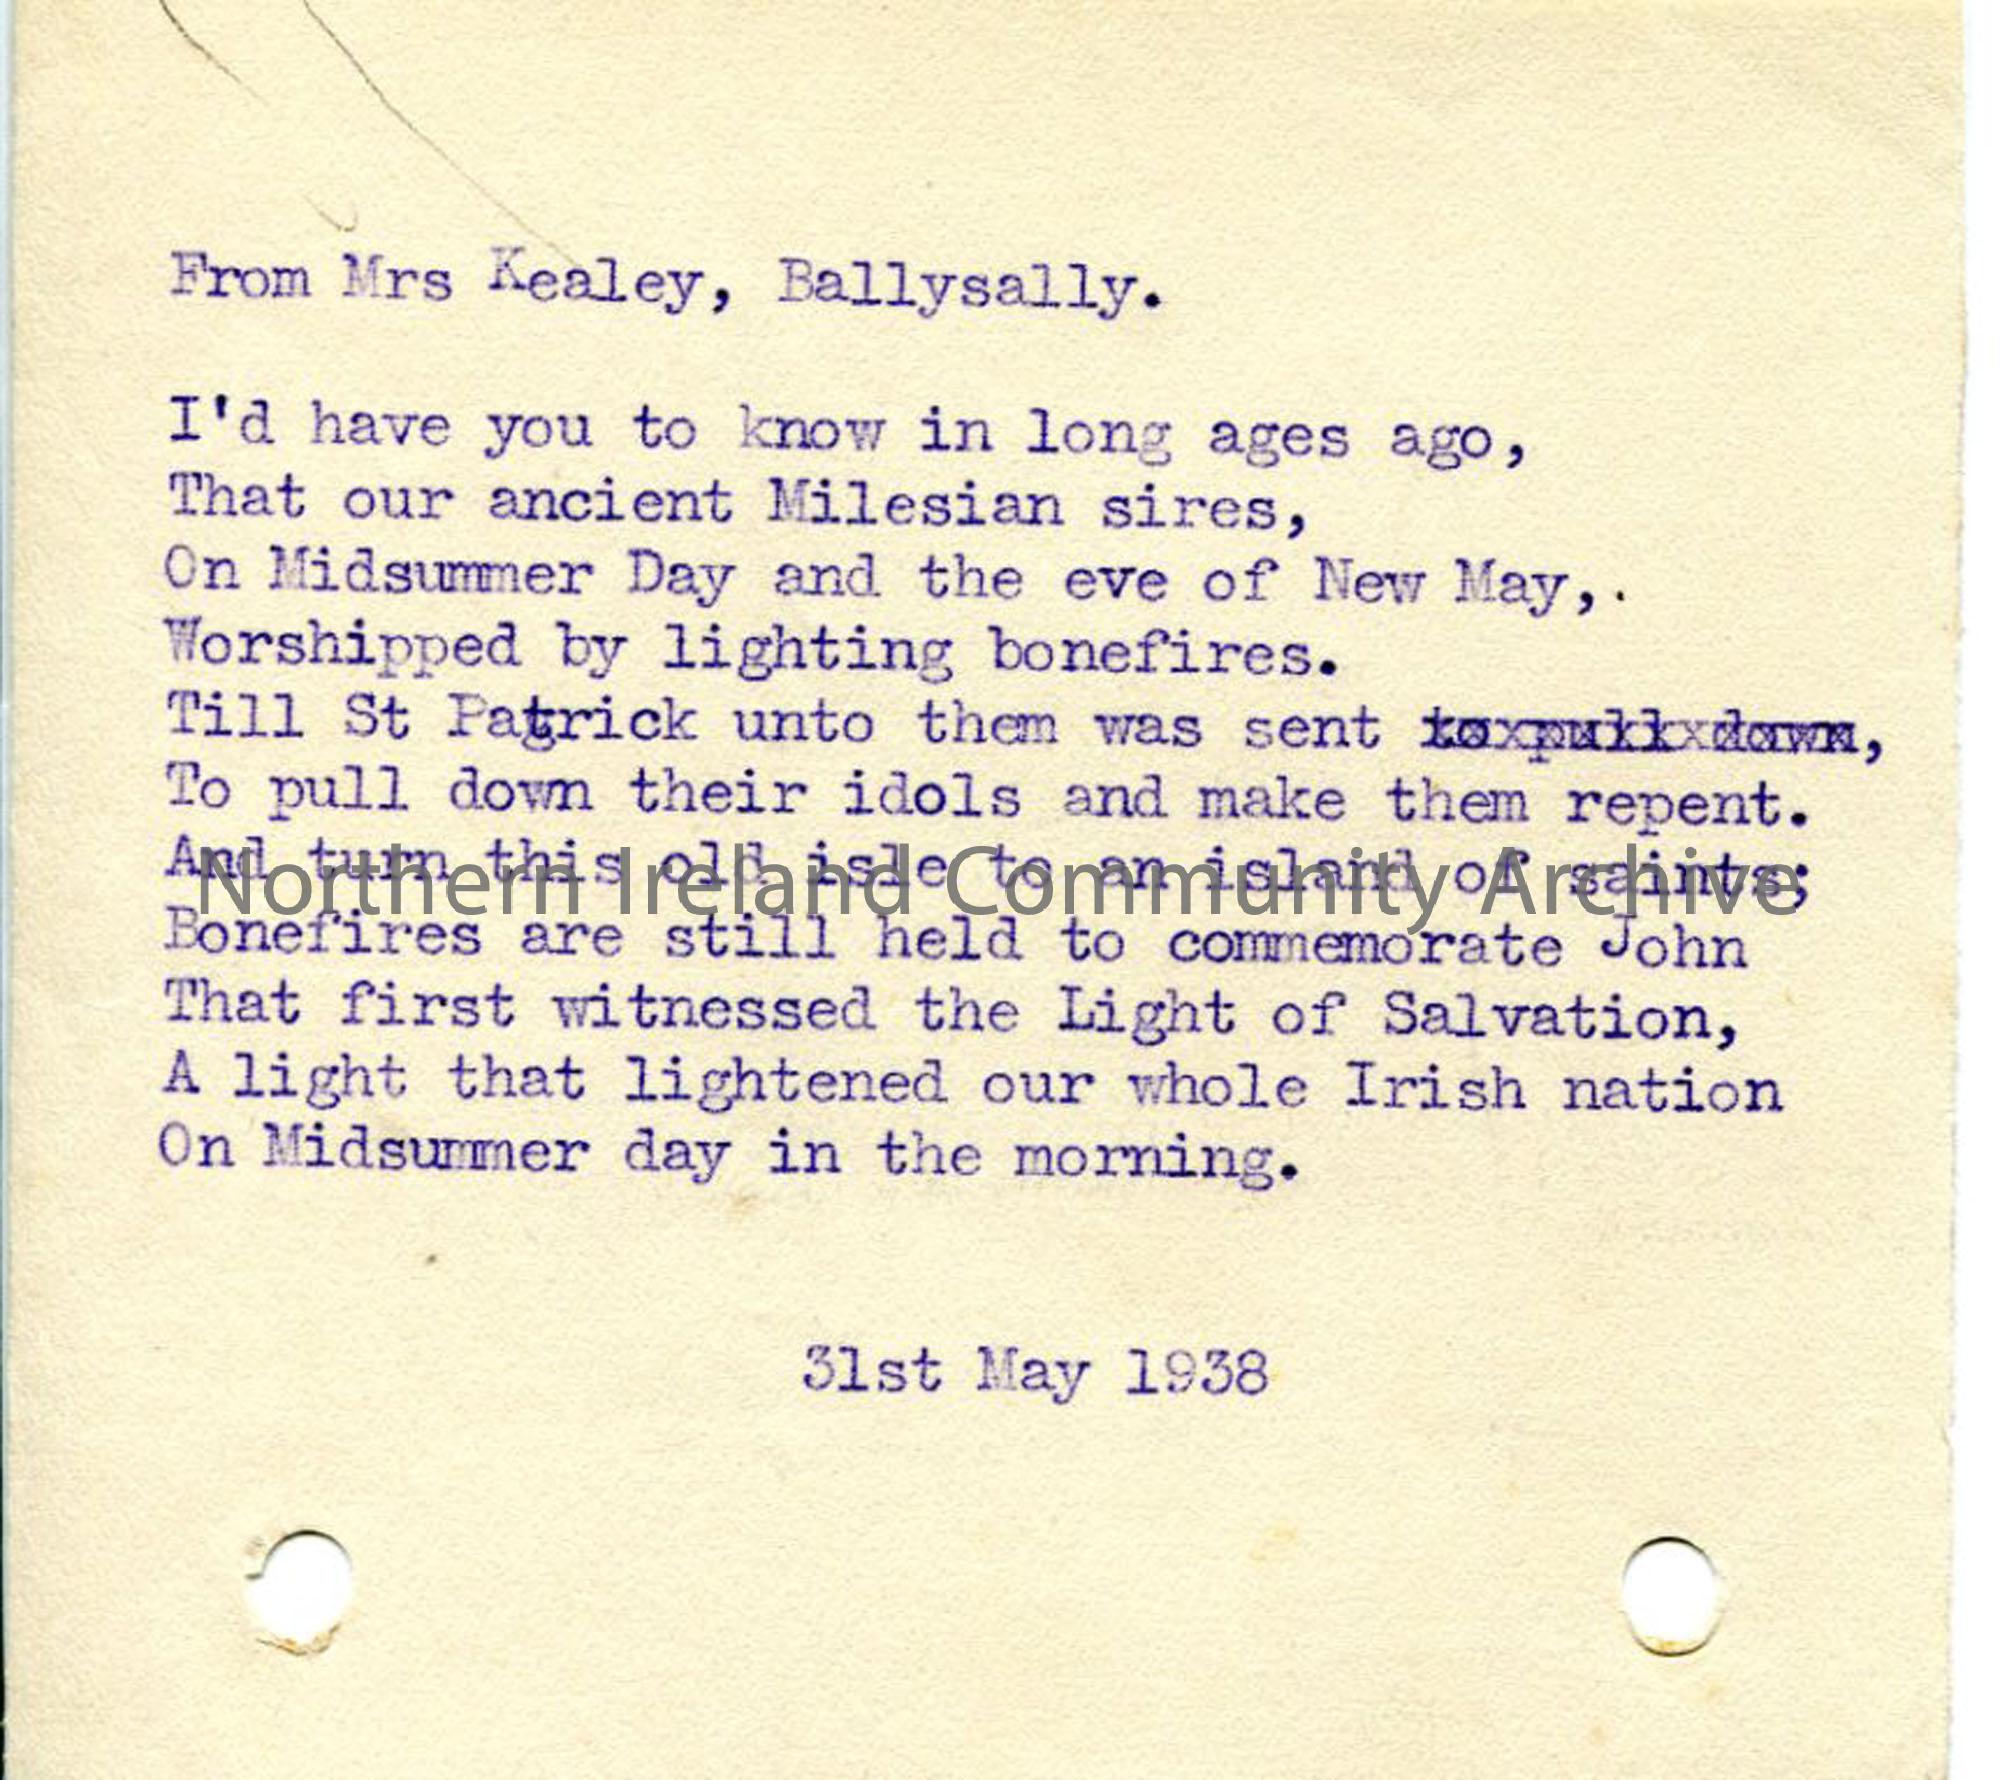 Untitled song from Mrs Kealey, 31st May 1938